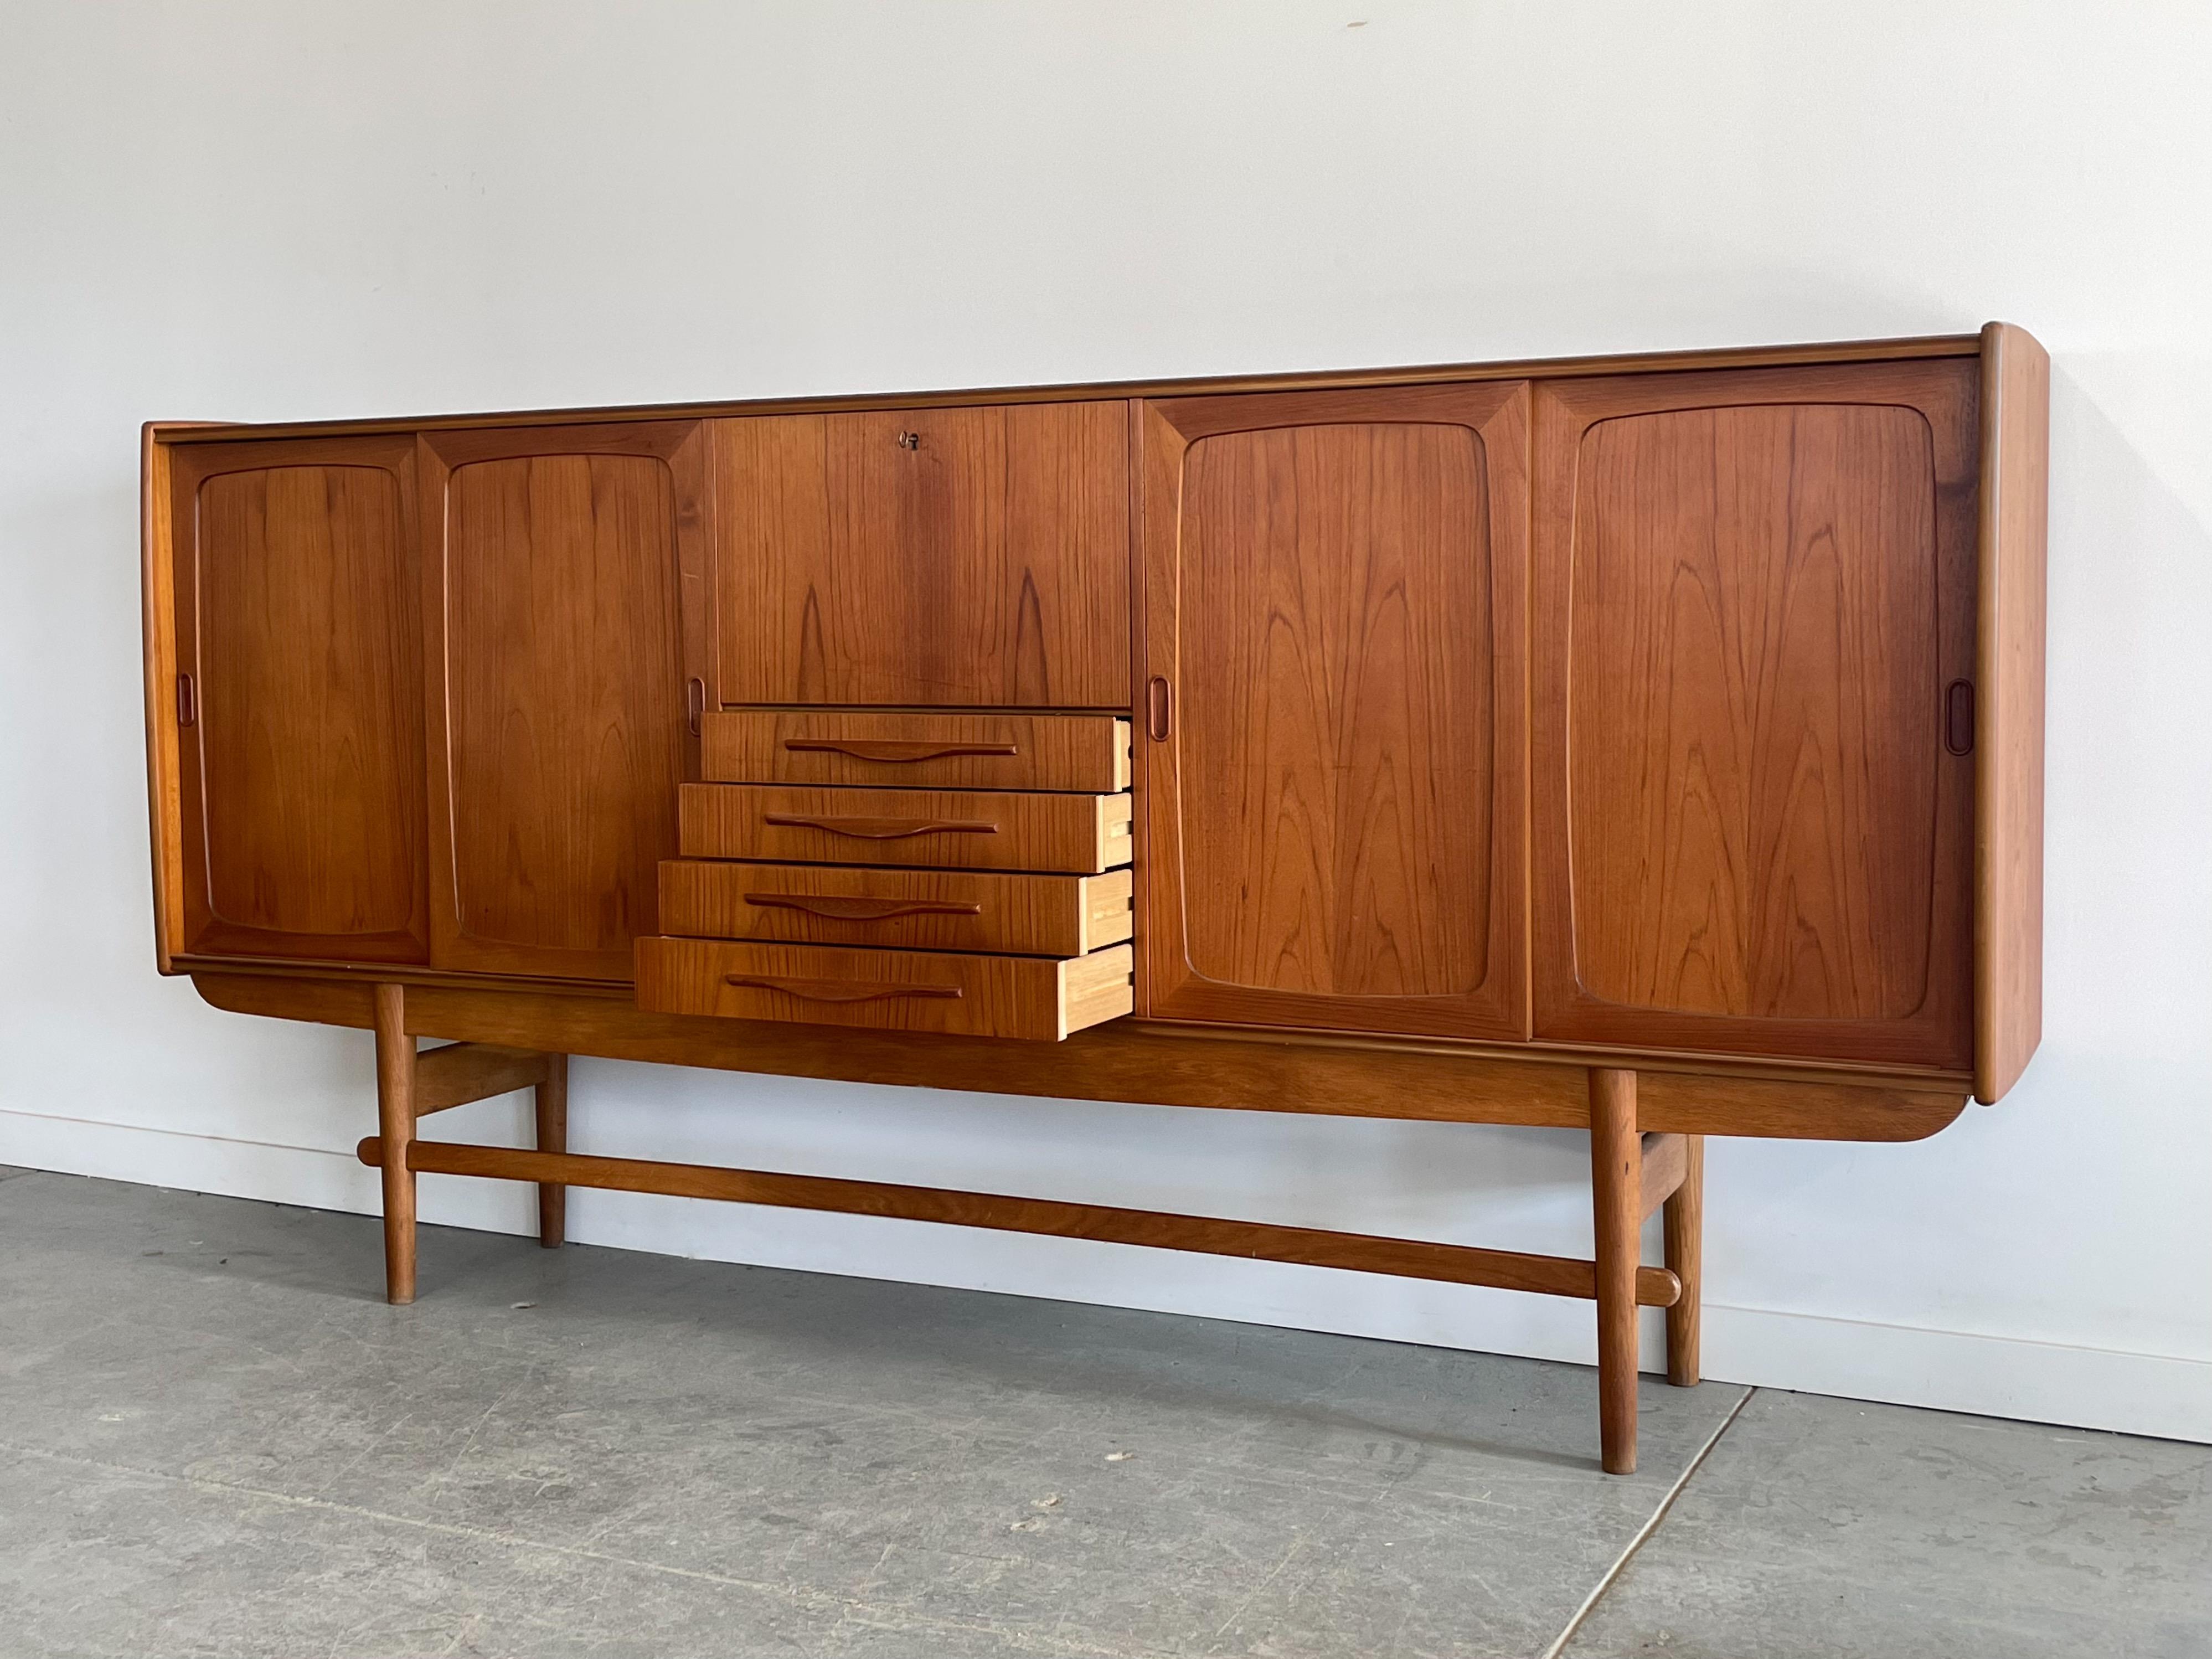 Monumental teak highboard with oak base by Holger Christiansen, Denmark. This massive storage piece offers adjustable shelving, drawers, and a drop down bar cabinet. The construction and detailing is top-notch throughout. This piece features